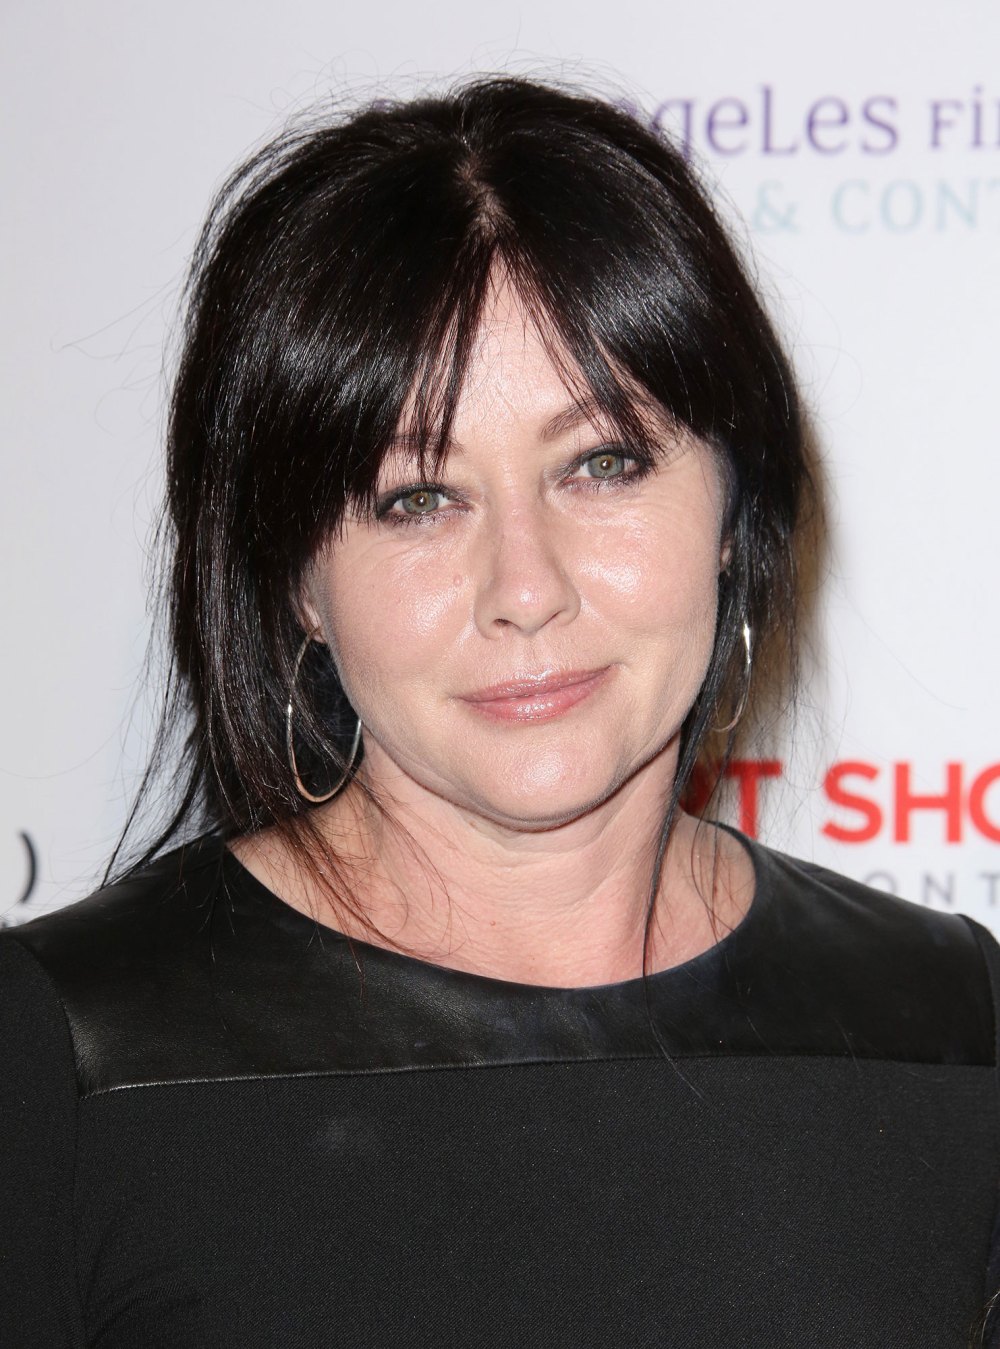 Shannen Doherty Shares Emotional #FBF Photo From Day After She Got Chemotherapy